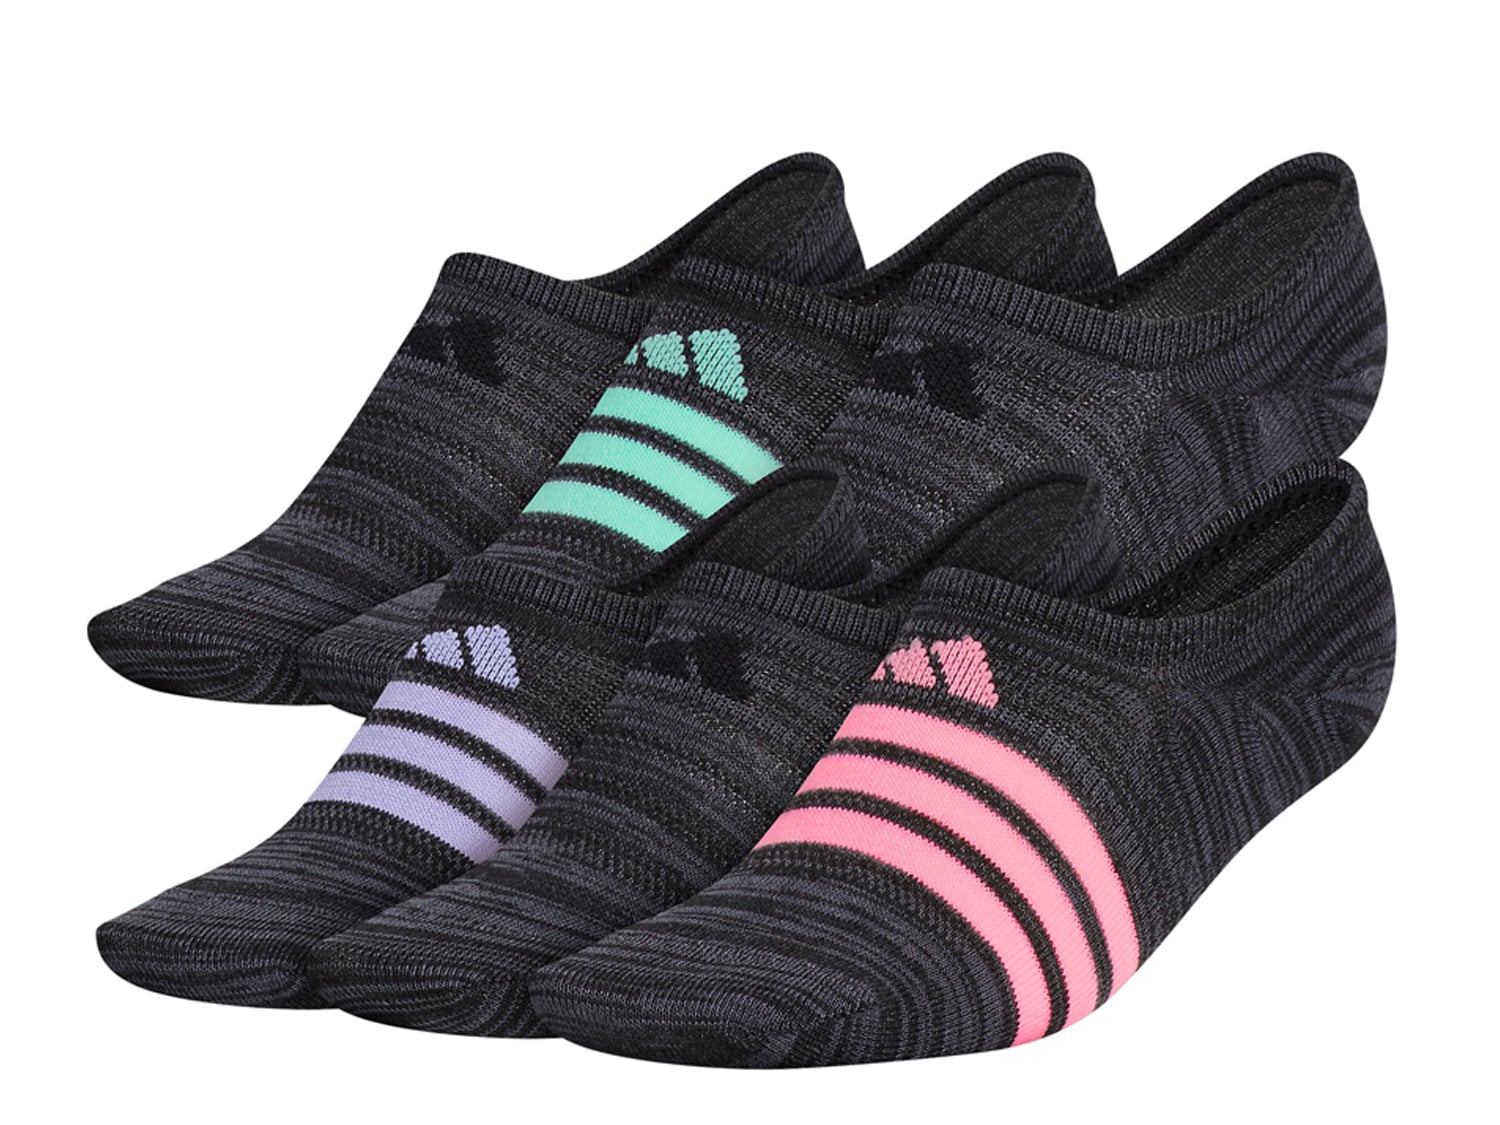 adidas Superlite II Women's No Show Liners - 6 Pack - Free Shipping | DSW